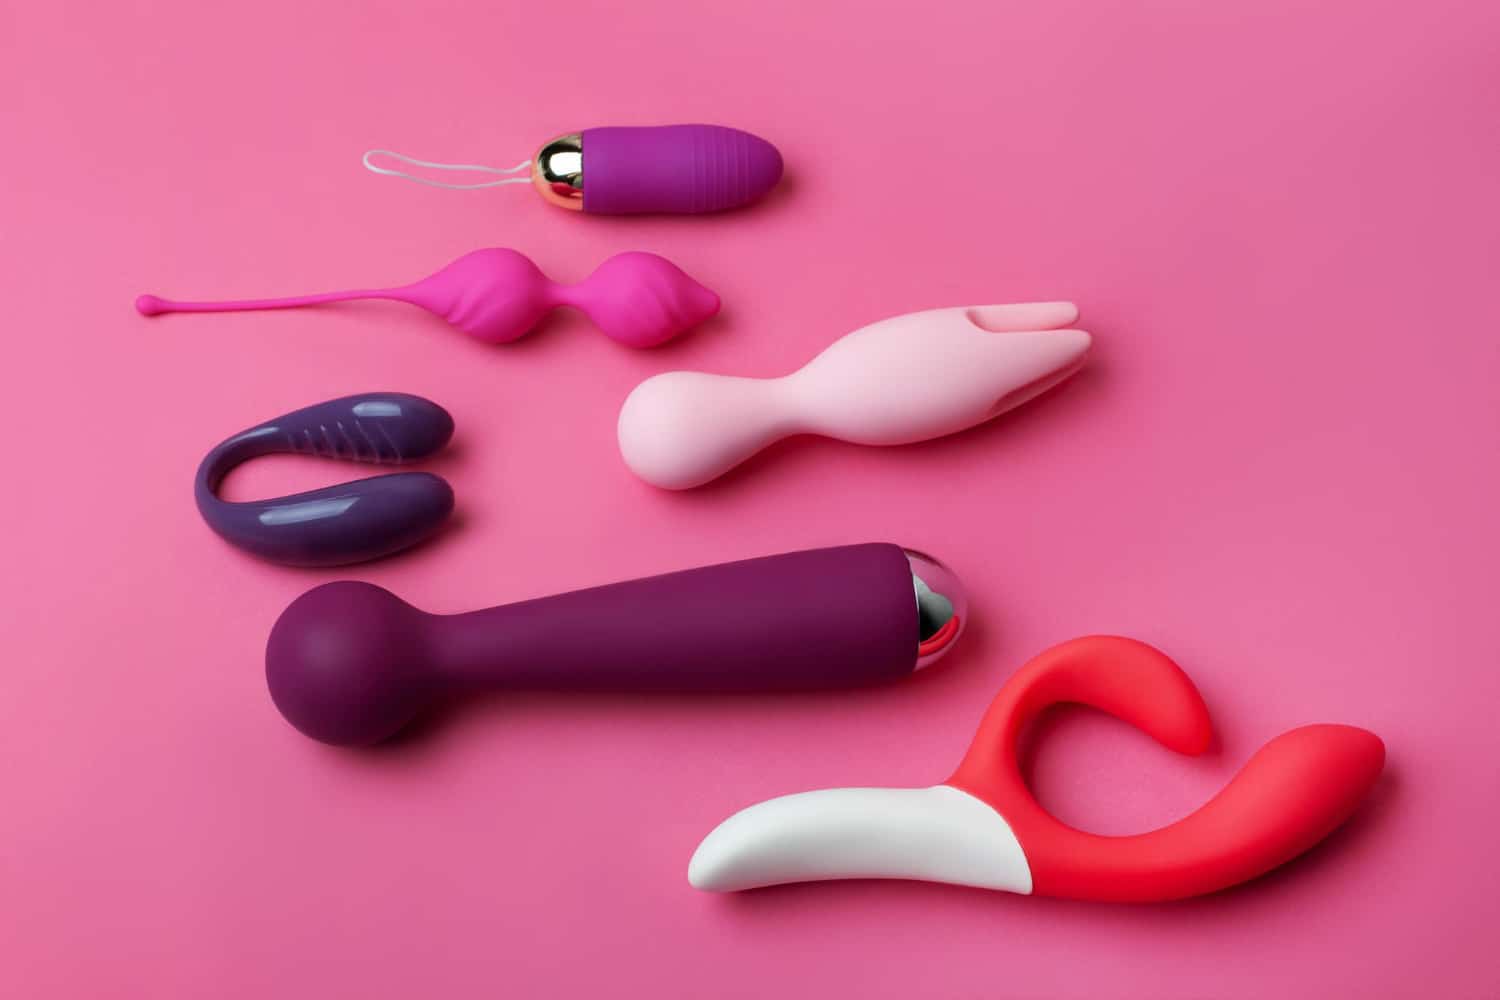 Experience The Pleasure Of RoseToyOfficial’s Innovative Adult Toys